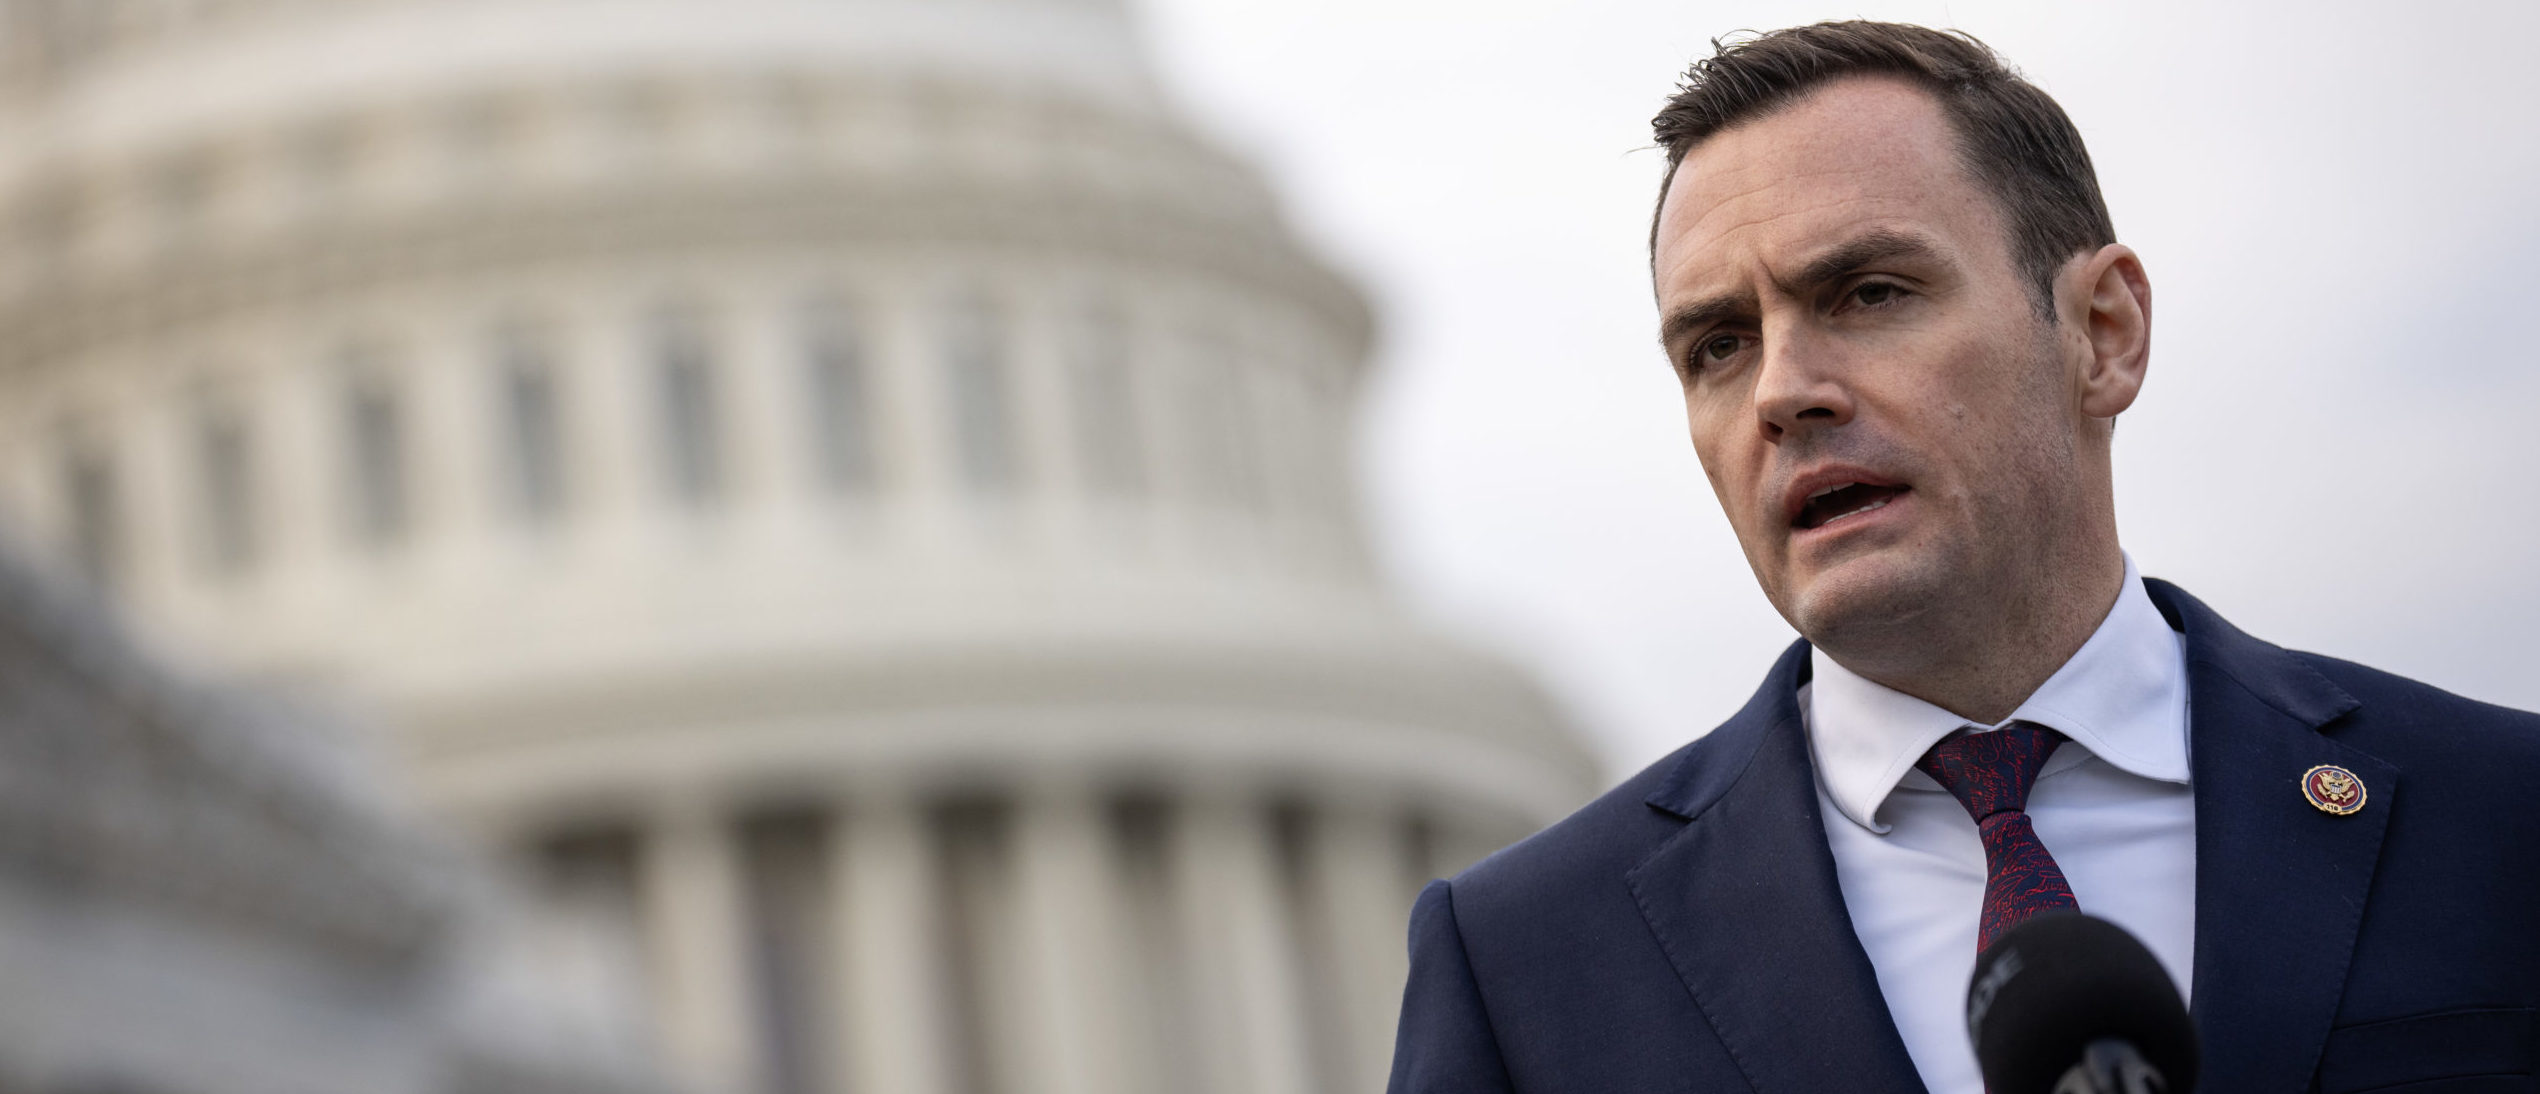 Chairman of the House Select Committee on China Rep. Mike Gallagher (R-WI). (Photo by Drew Angerer/Getty Images)